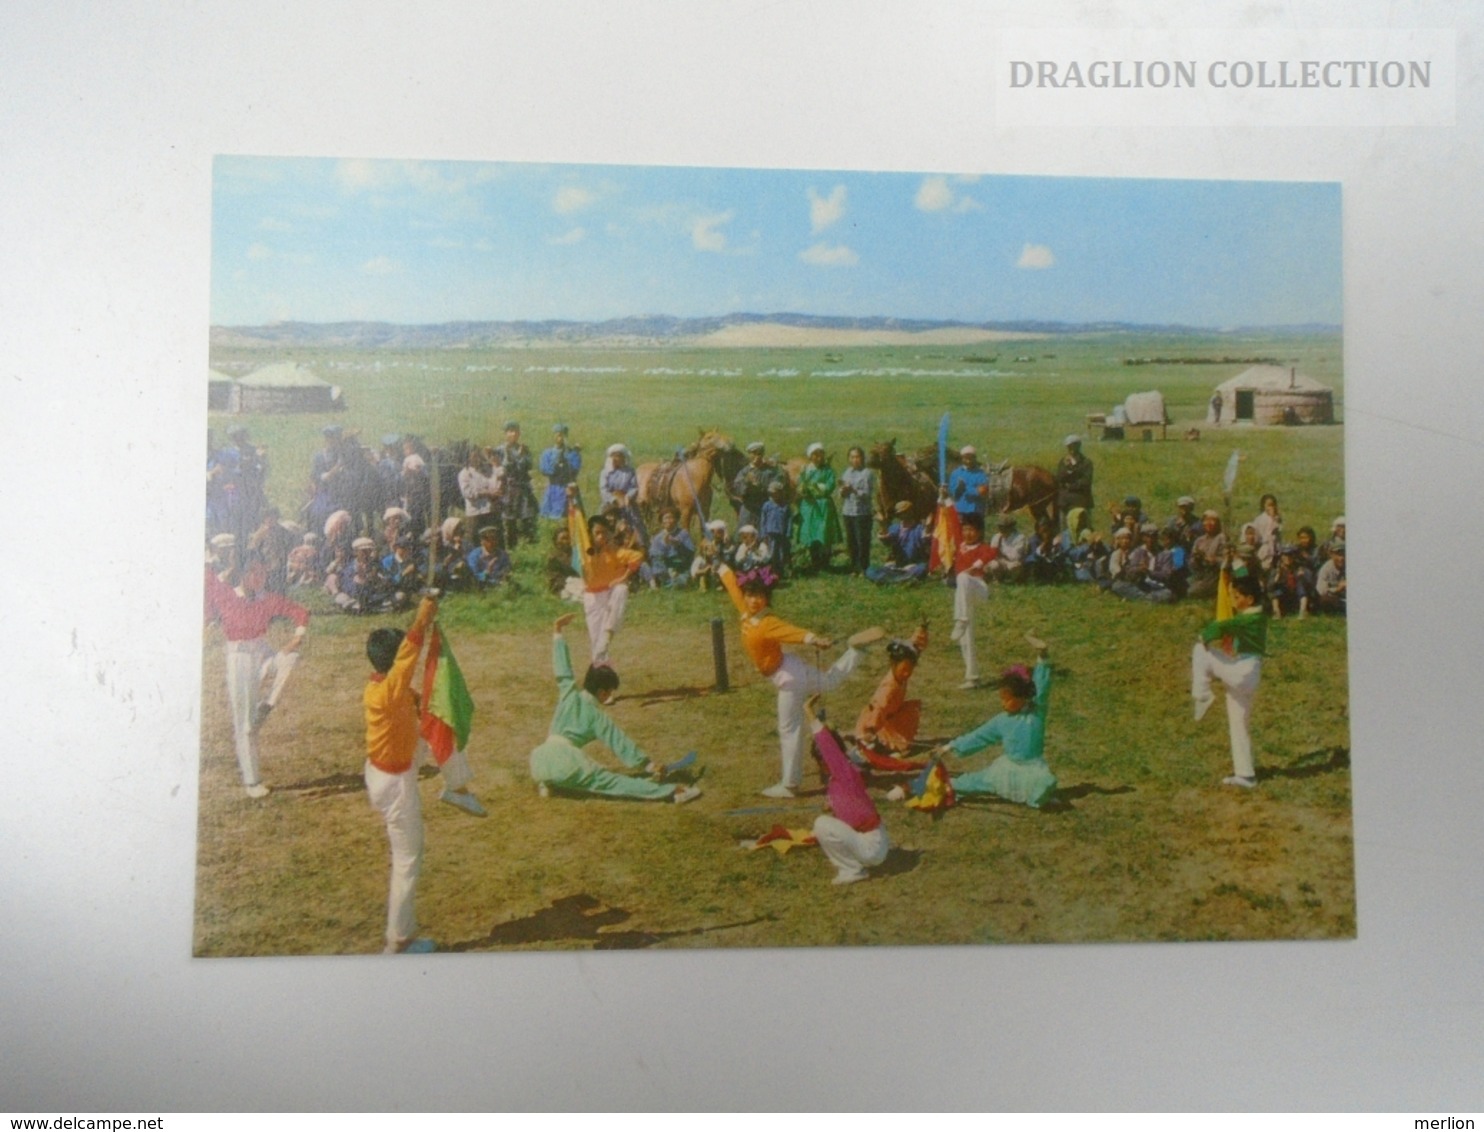 D163811 China Inner Mongolia - Traditional Sports  -Dancers  - Festival  Ca 1970's - Mongolia